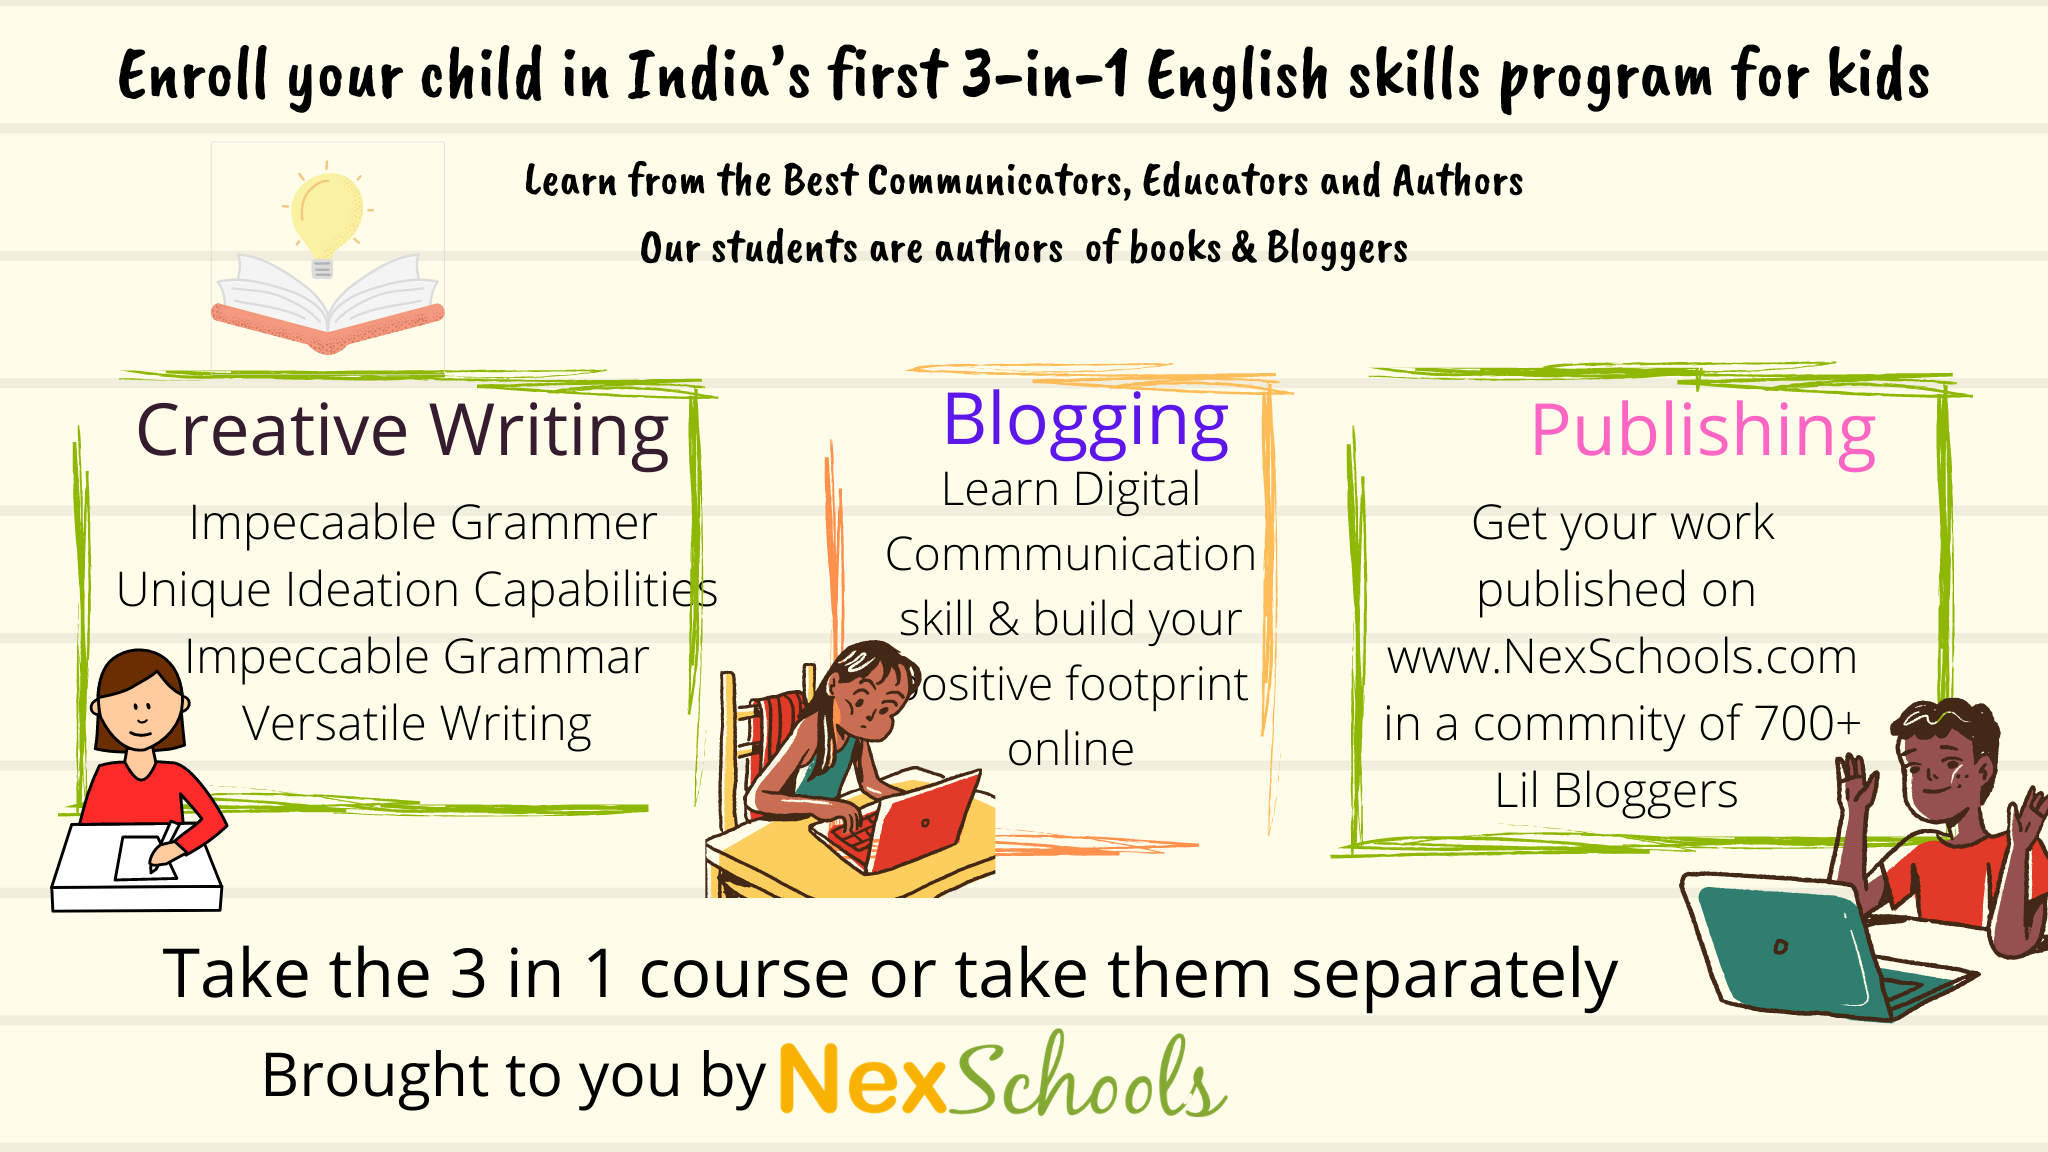 Creative writing classes, Creative writing course, Creative writing and blog writing course for children, How to be a Blogger for children, Writing classes, Improve your English, NexSchools Blog writing course for students of Middle School, primary school writing courses